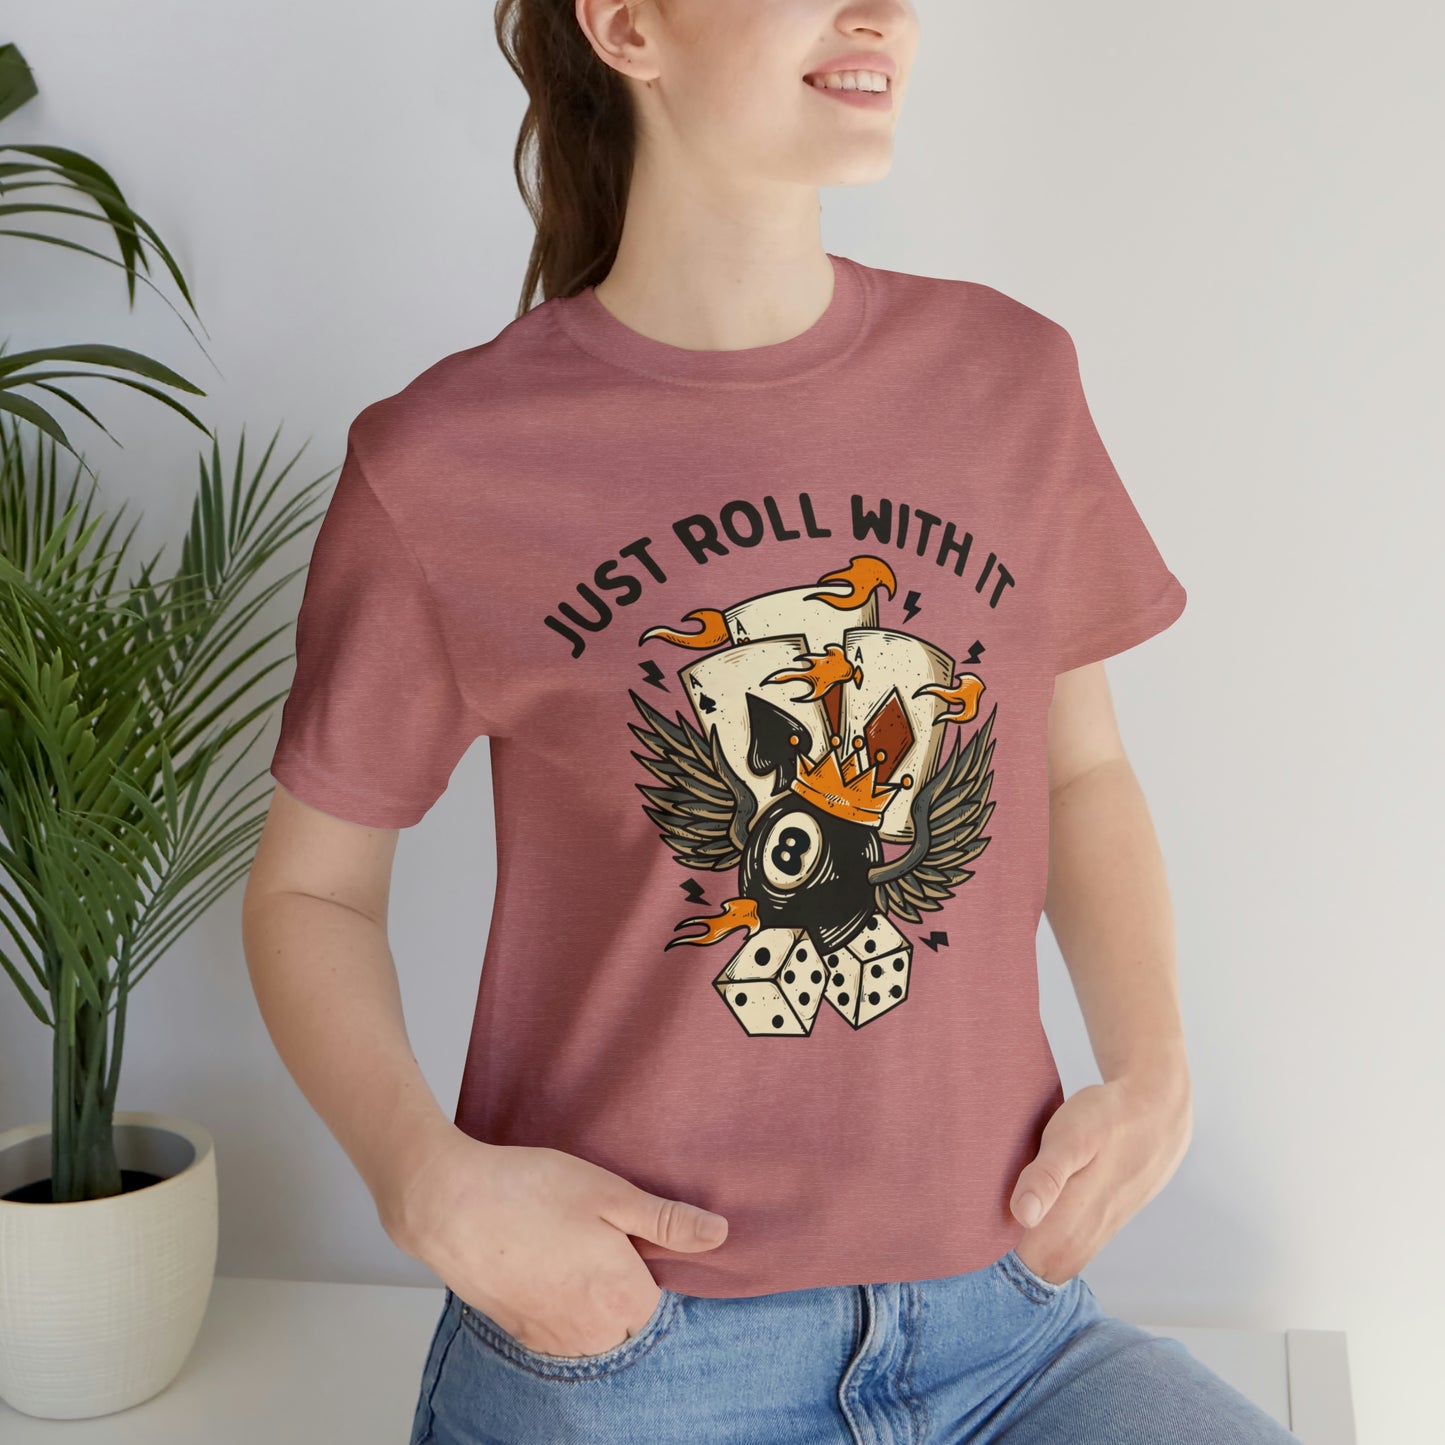 "Just Roll With It" Bella Canvas Short Sleeve Tee